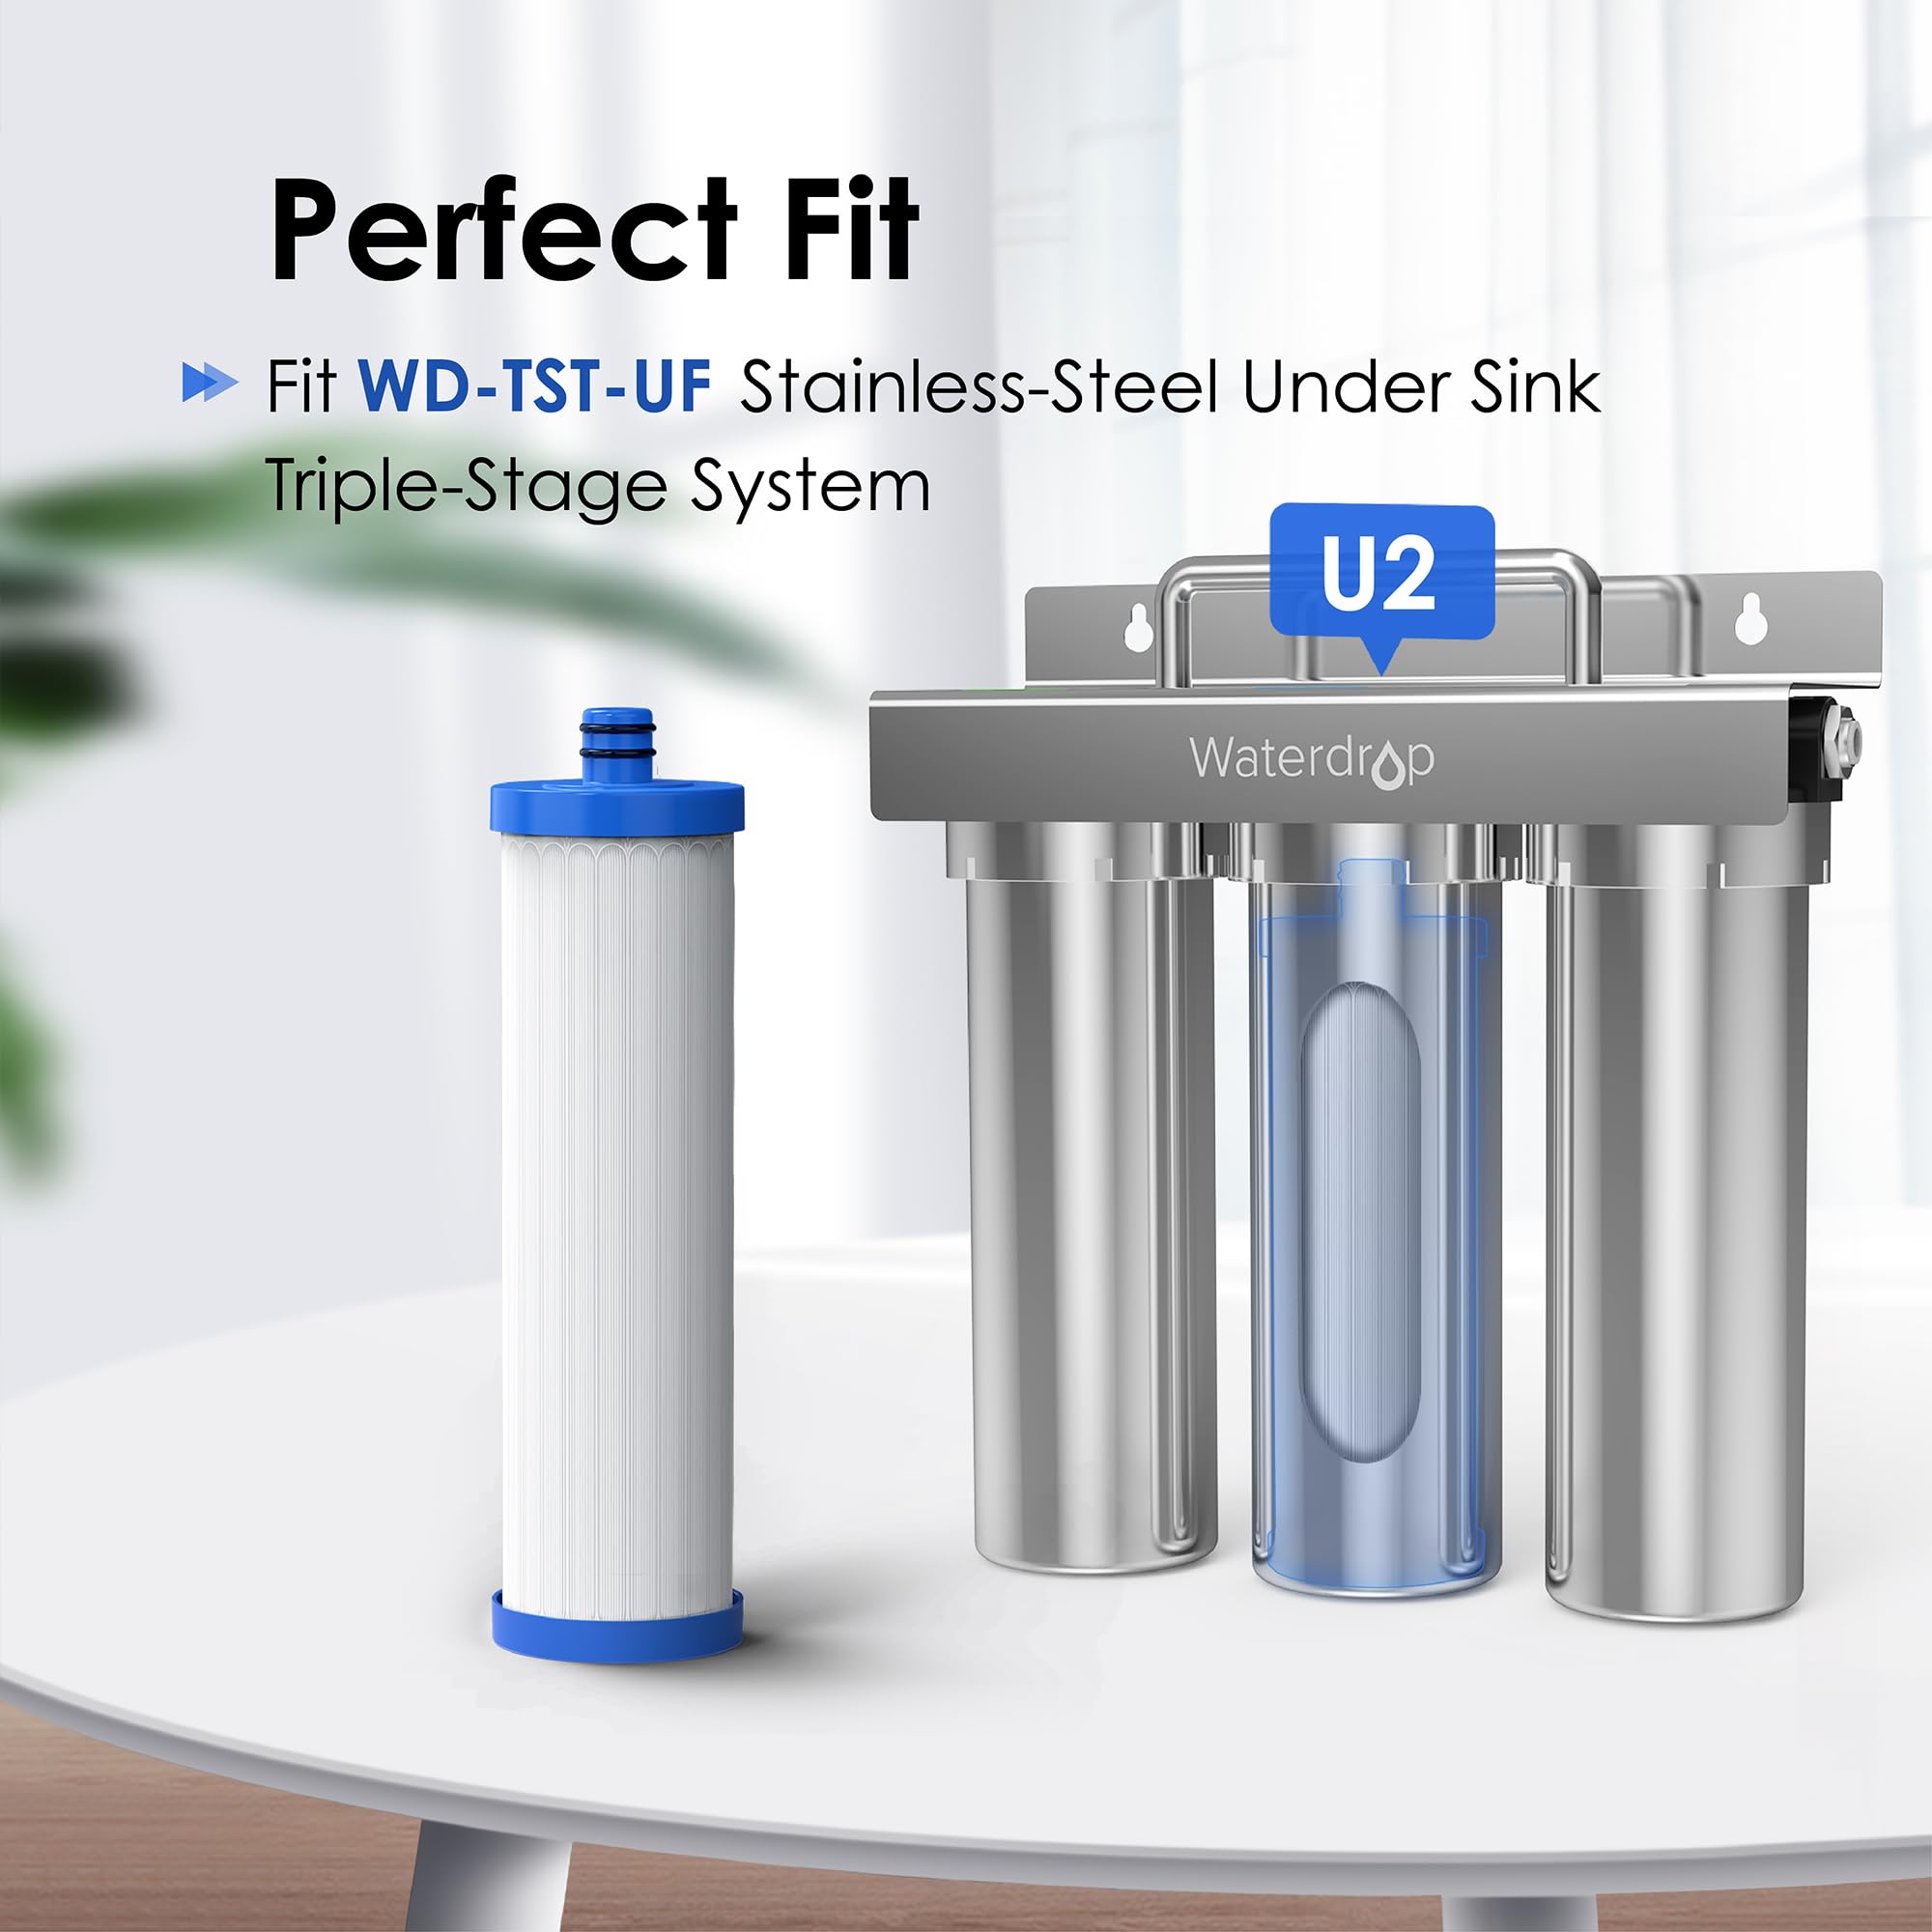 Waterdrop U2 Under Sink Ultra Filtration Water Filter, Replacement for TST-UF Ultra-Filtration Under Sink Water Filter System, 1 Pack